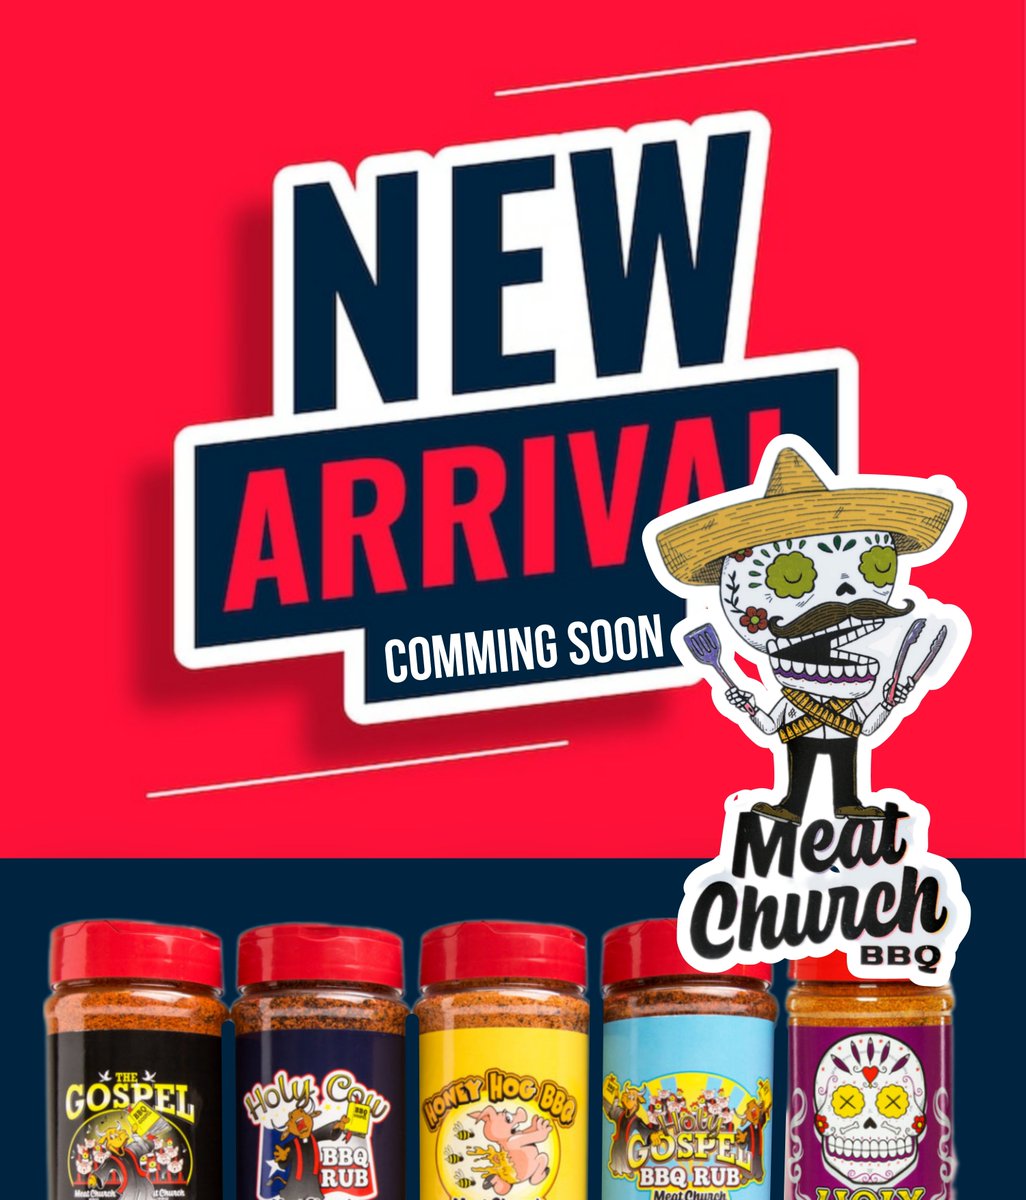 📣 Coming soon!
🔥 Craving an explosion of flavor? Say hello to Meat Crunch Seasoning!

slobsrusbbq.ca

#seasonings #meatcrunch #seasoningmix #rouses #spices #seasoningblends #spice #rubs #spiceshop #chickenseasoning #foodspices #spiceblends #spiceblend #dryrub